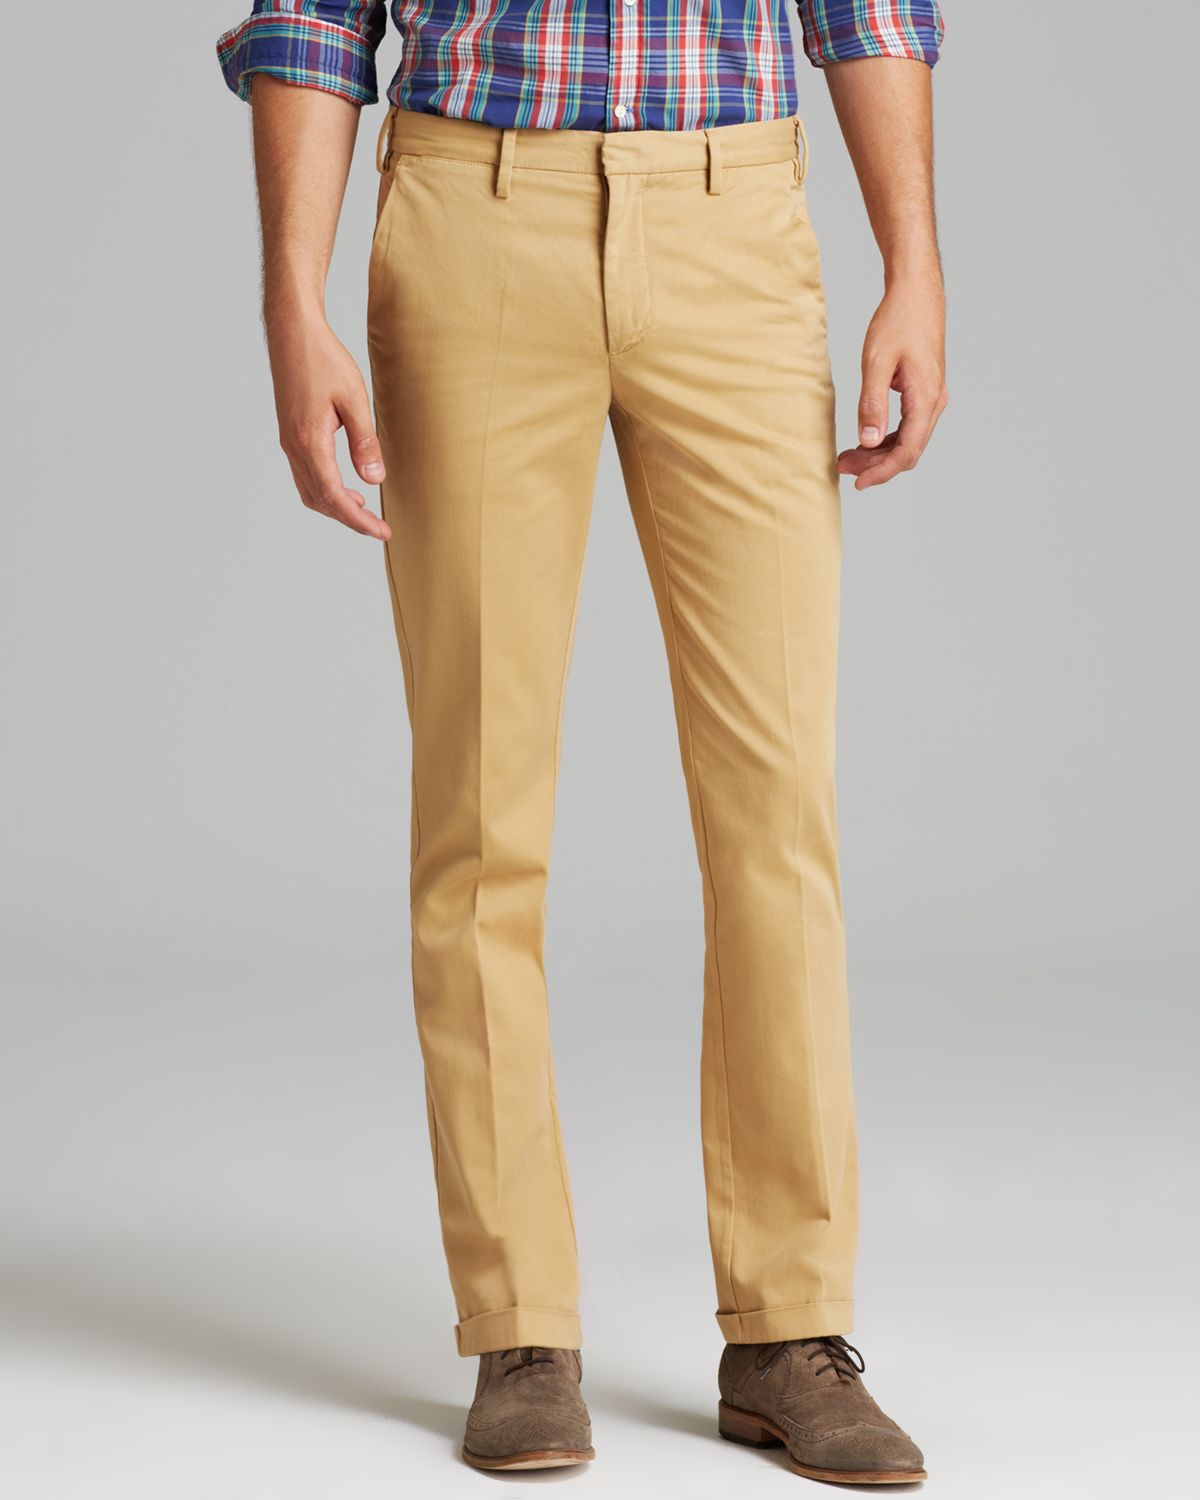 Gant Rugger Winter Chino Pants in Beige (Natural) for Men - Lyst